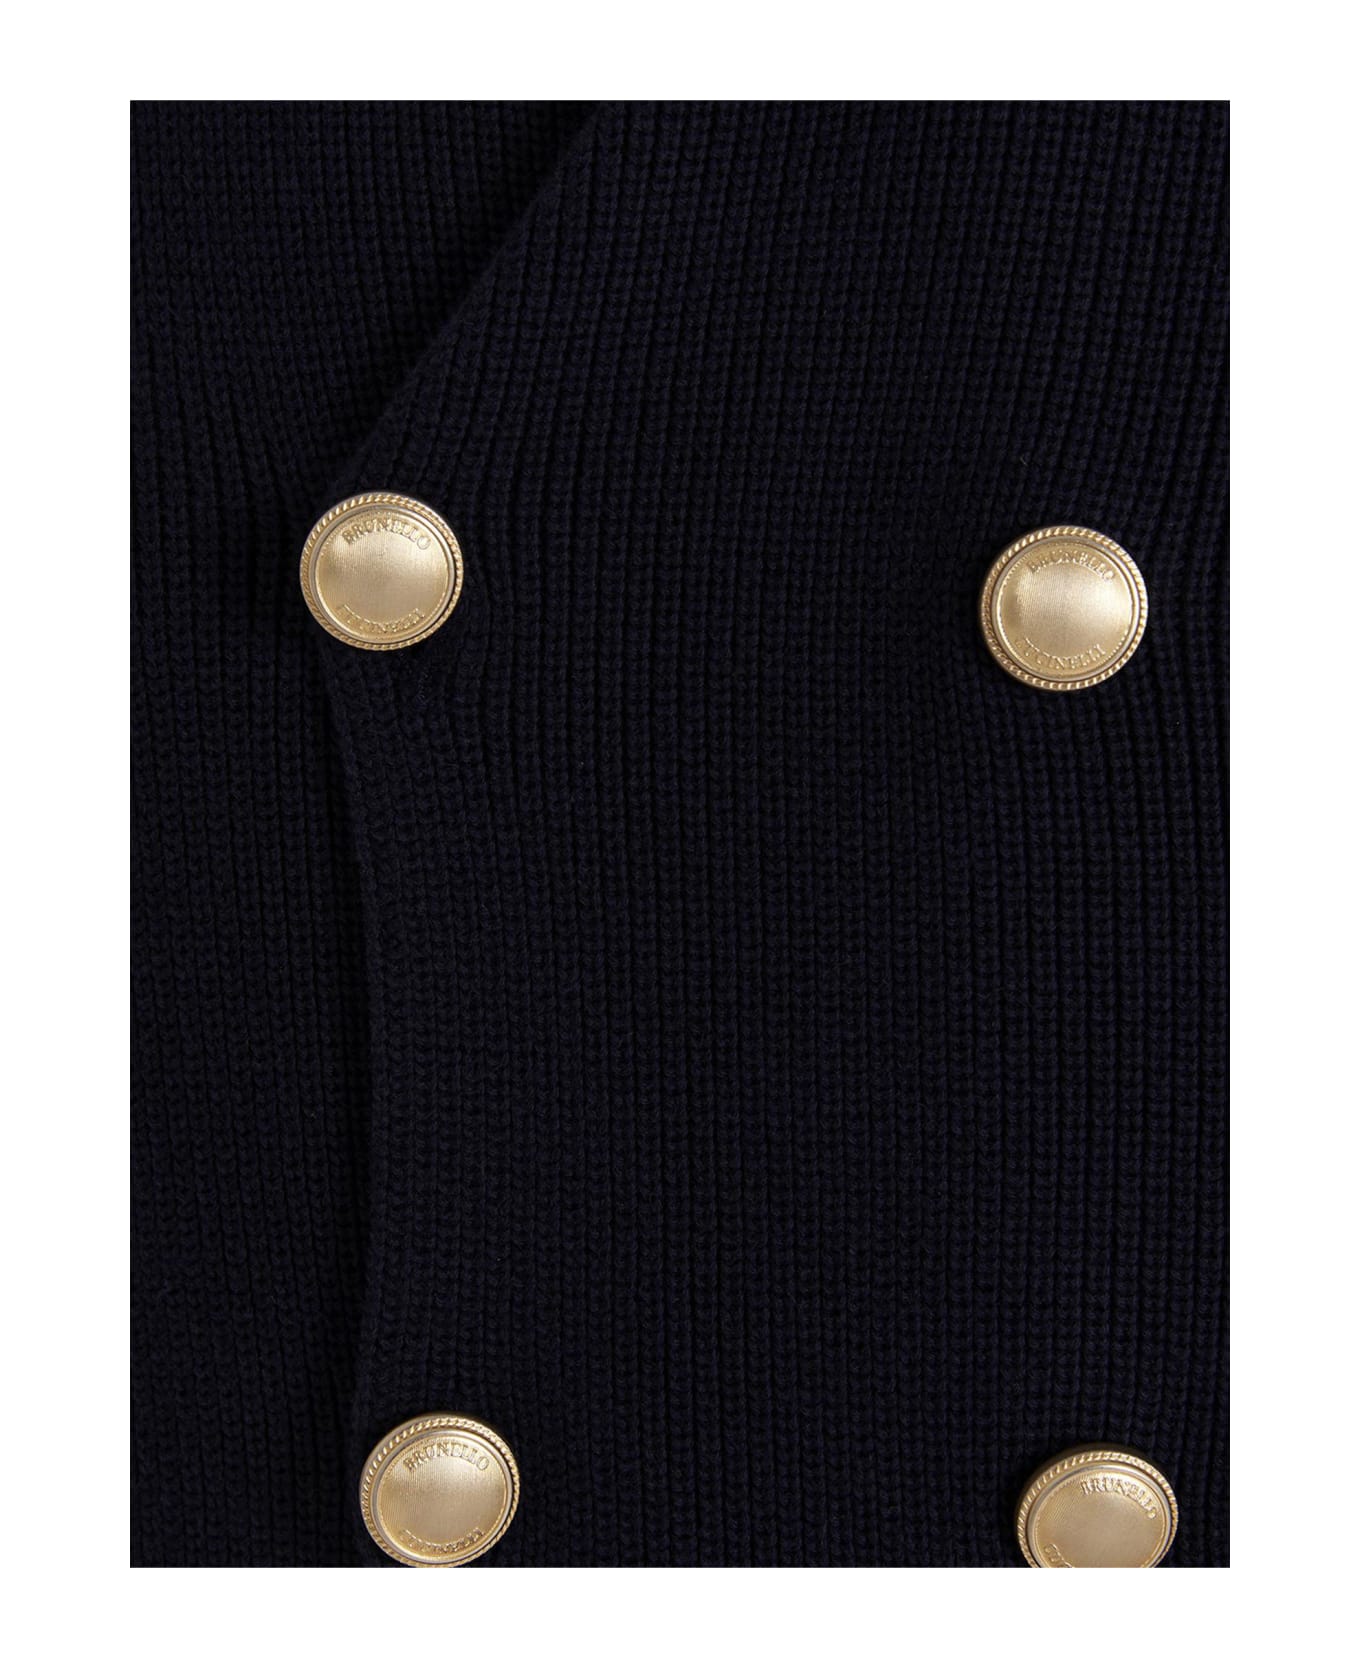 Brunello Cucinelli Double-breasted Cardigan - Navy